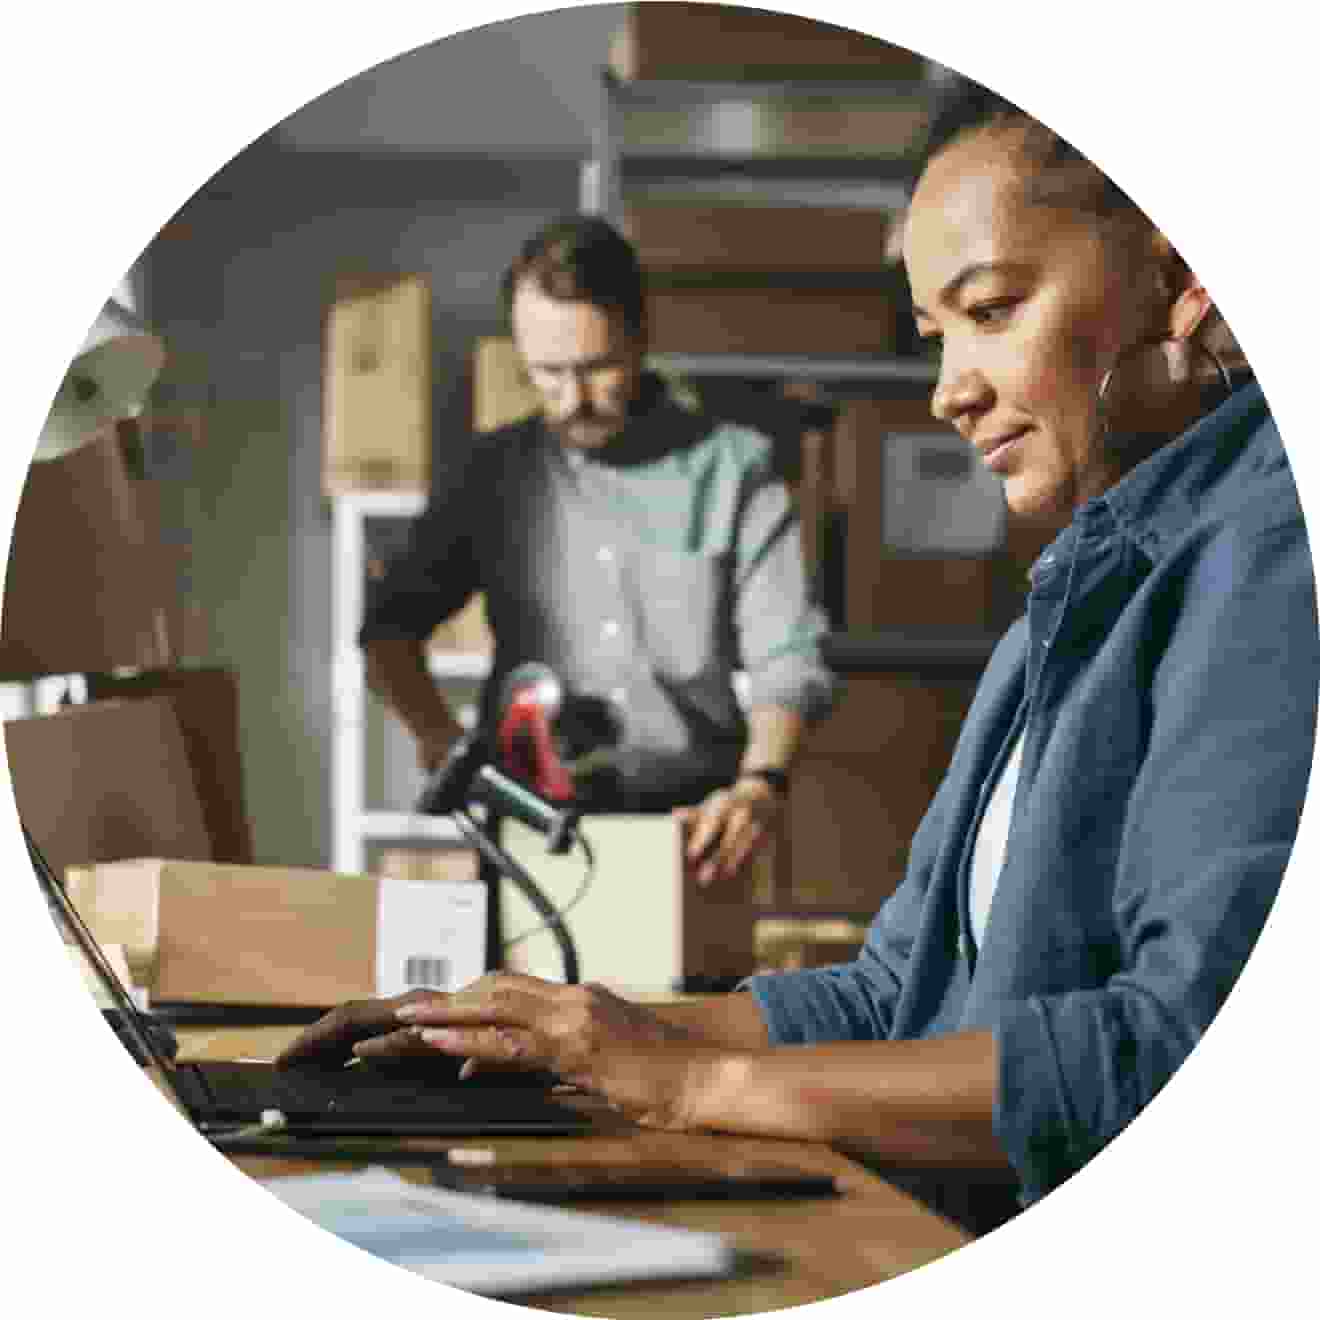 Woman on laptop with man in background doing product inventory